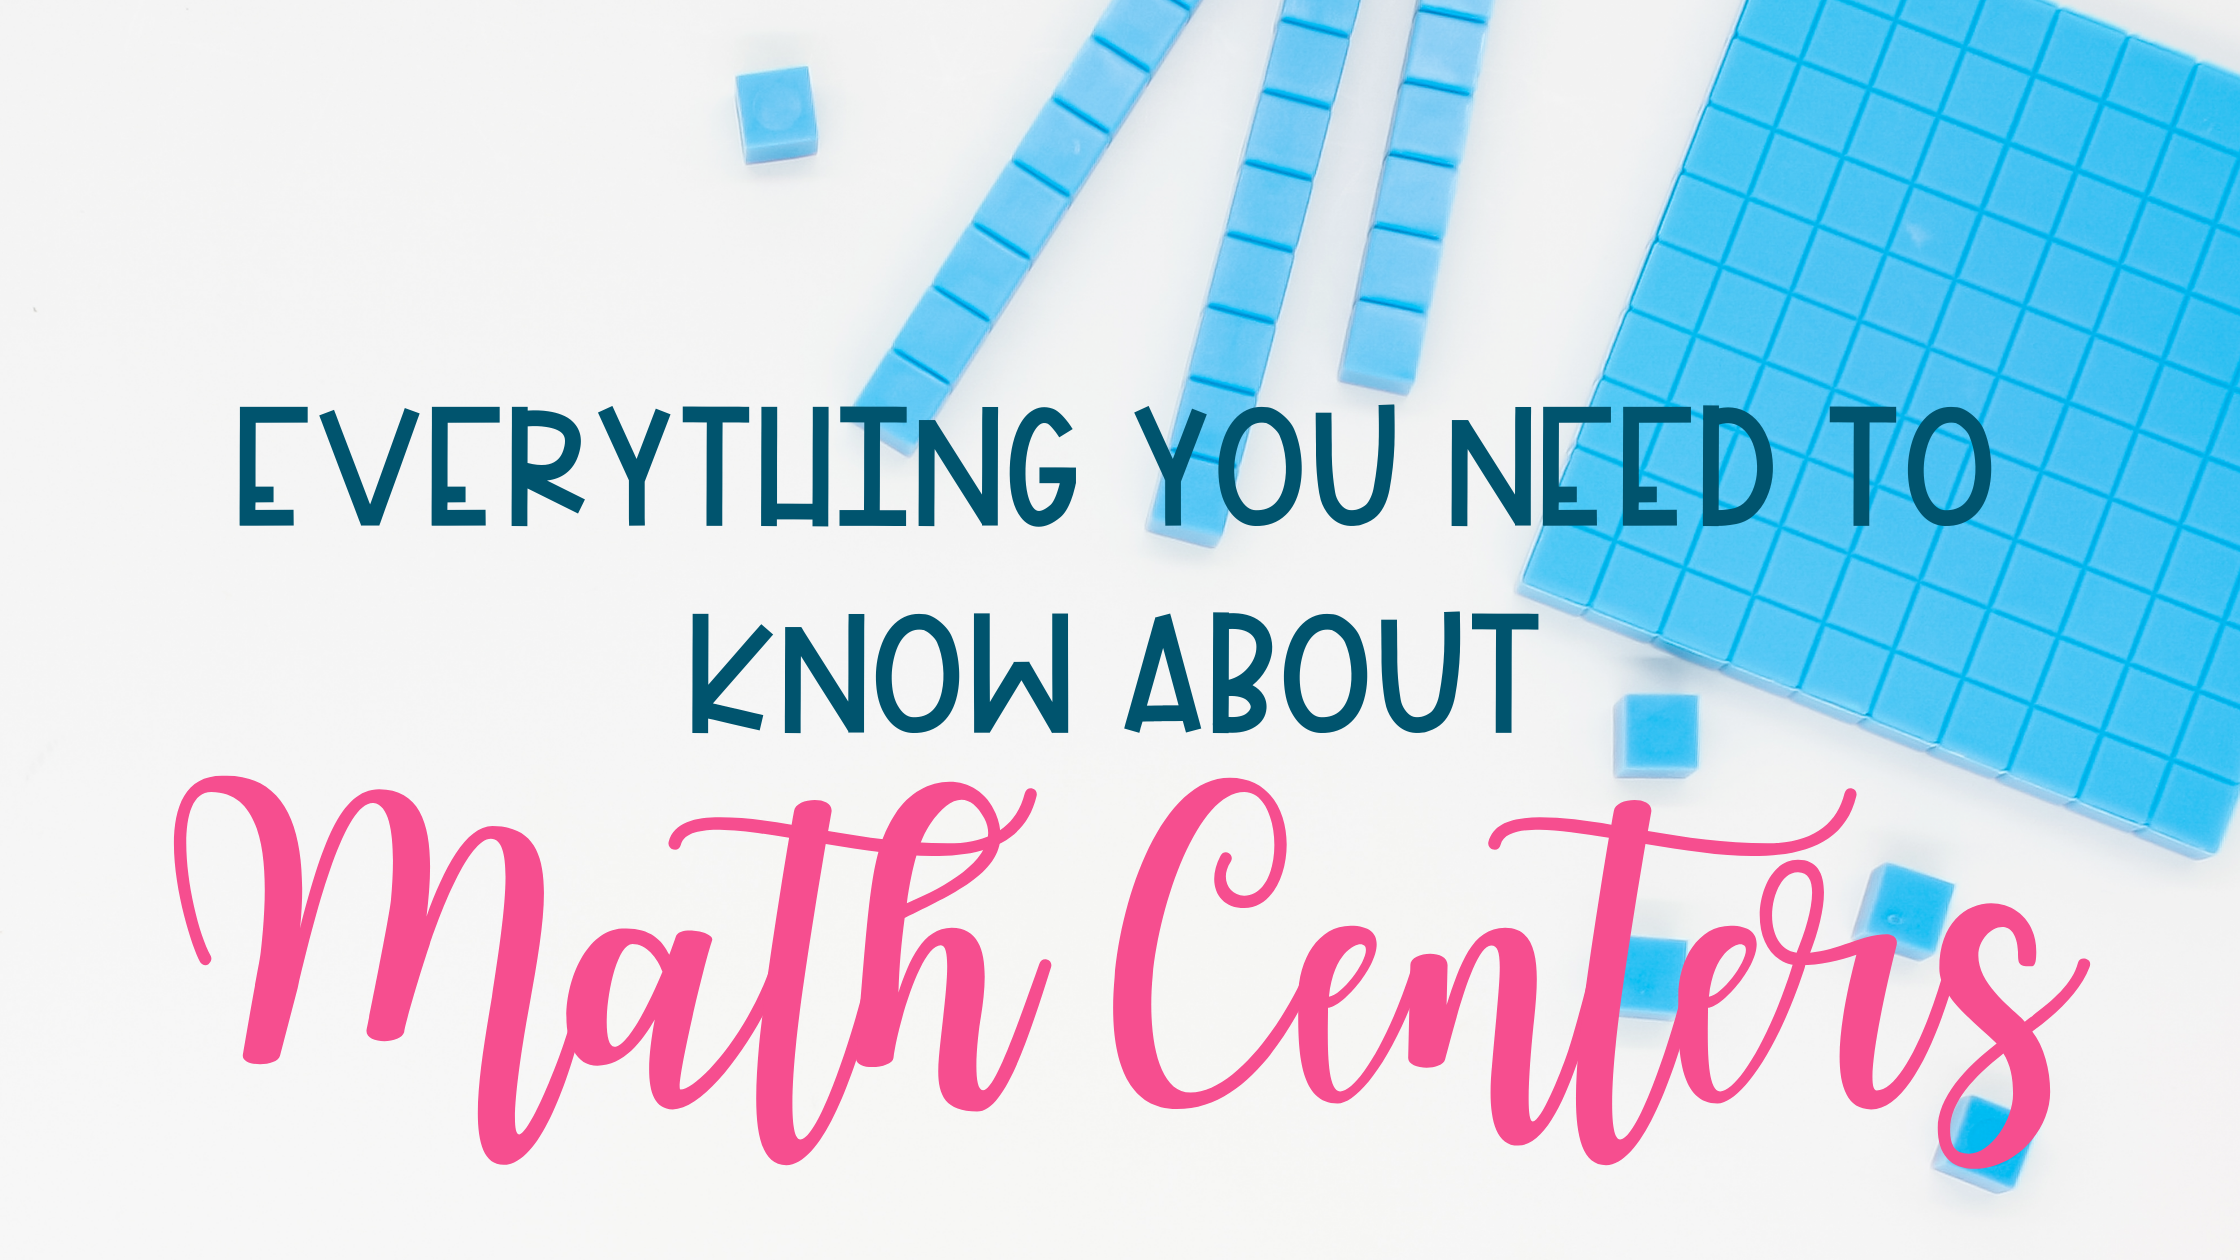 Everything You Need to Know About Math Centers